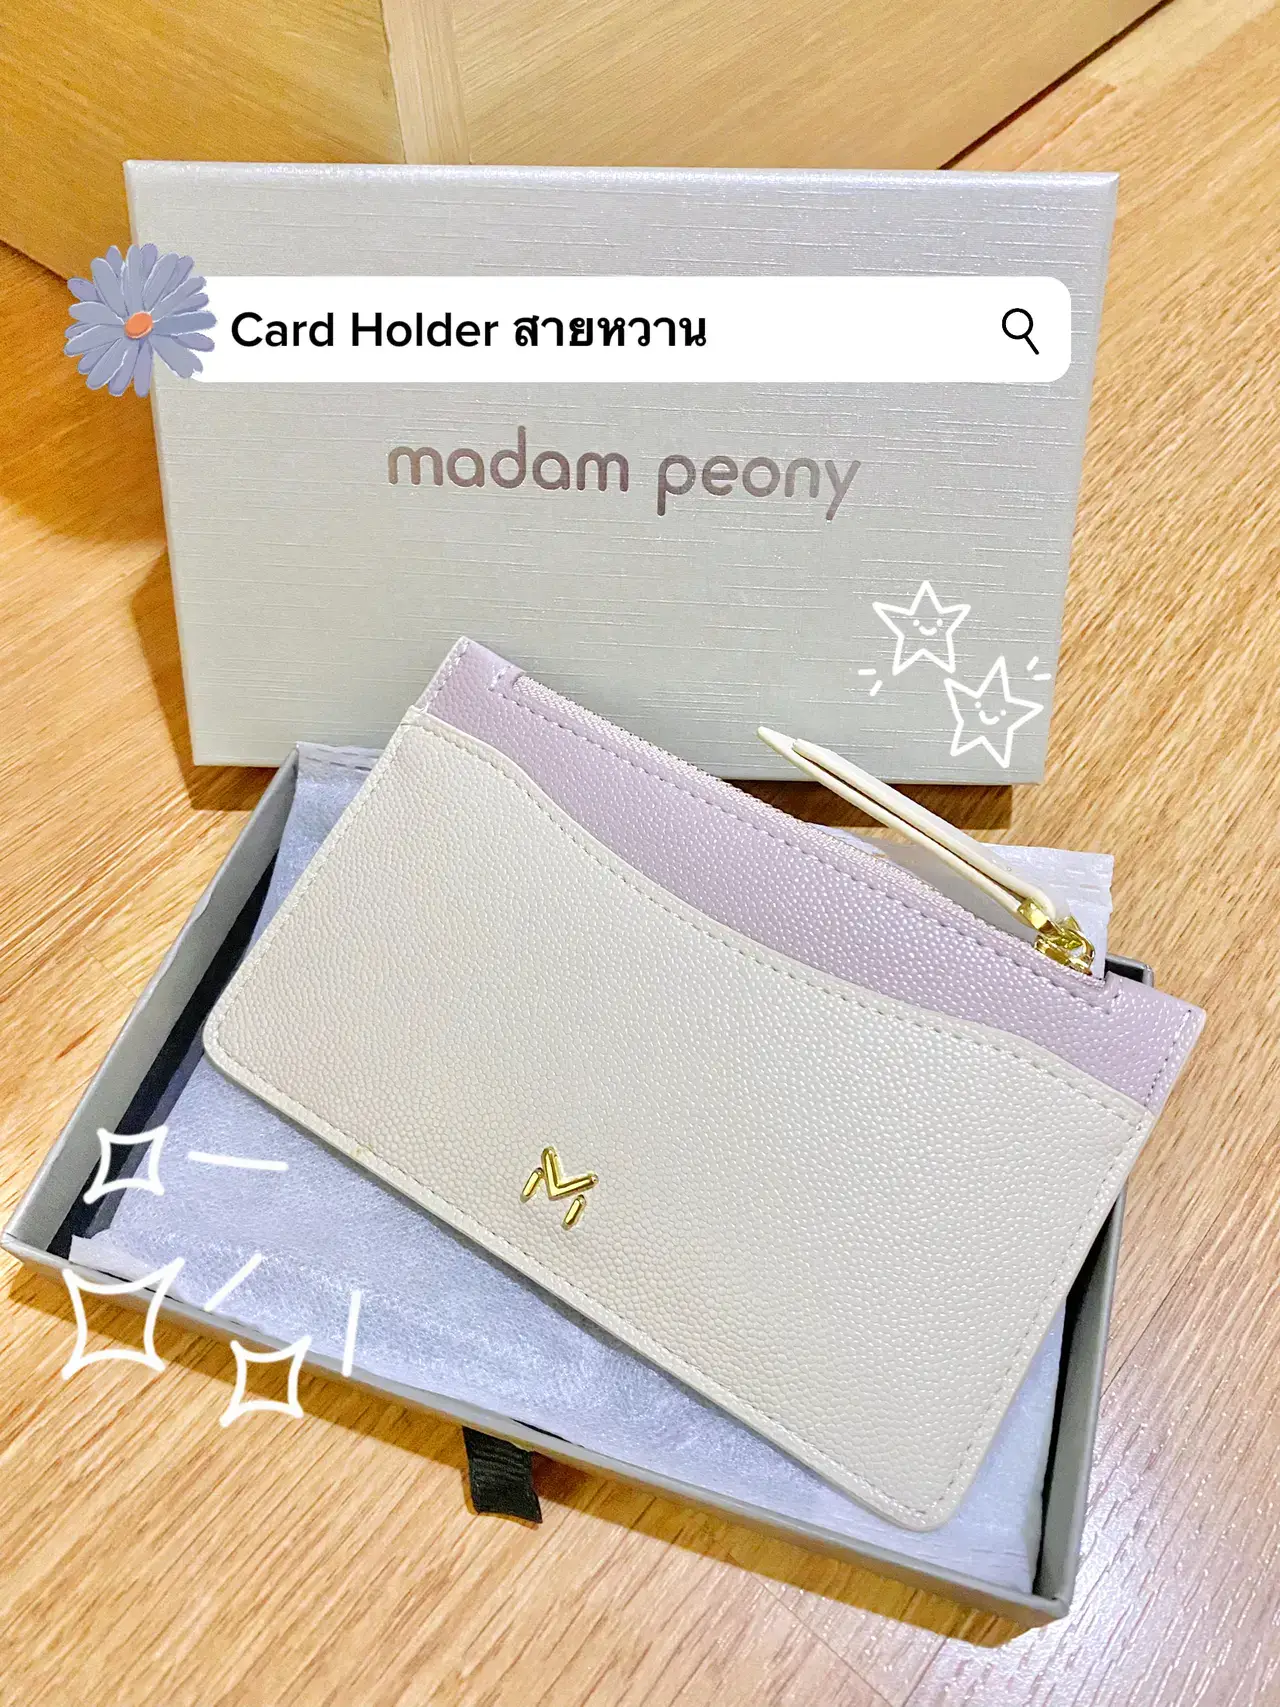 MY COLLECTION OF DESIGNER CARDHOLDERS, Gallery posted by michelleorgeta